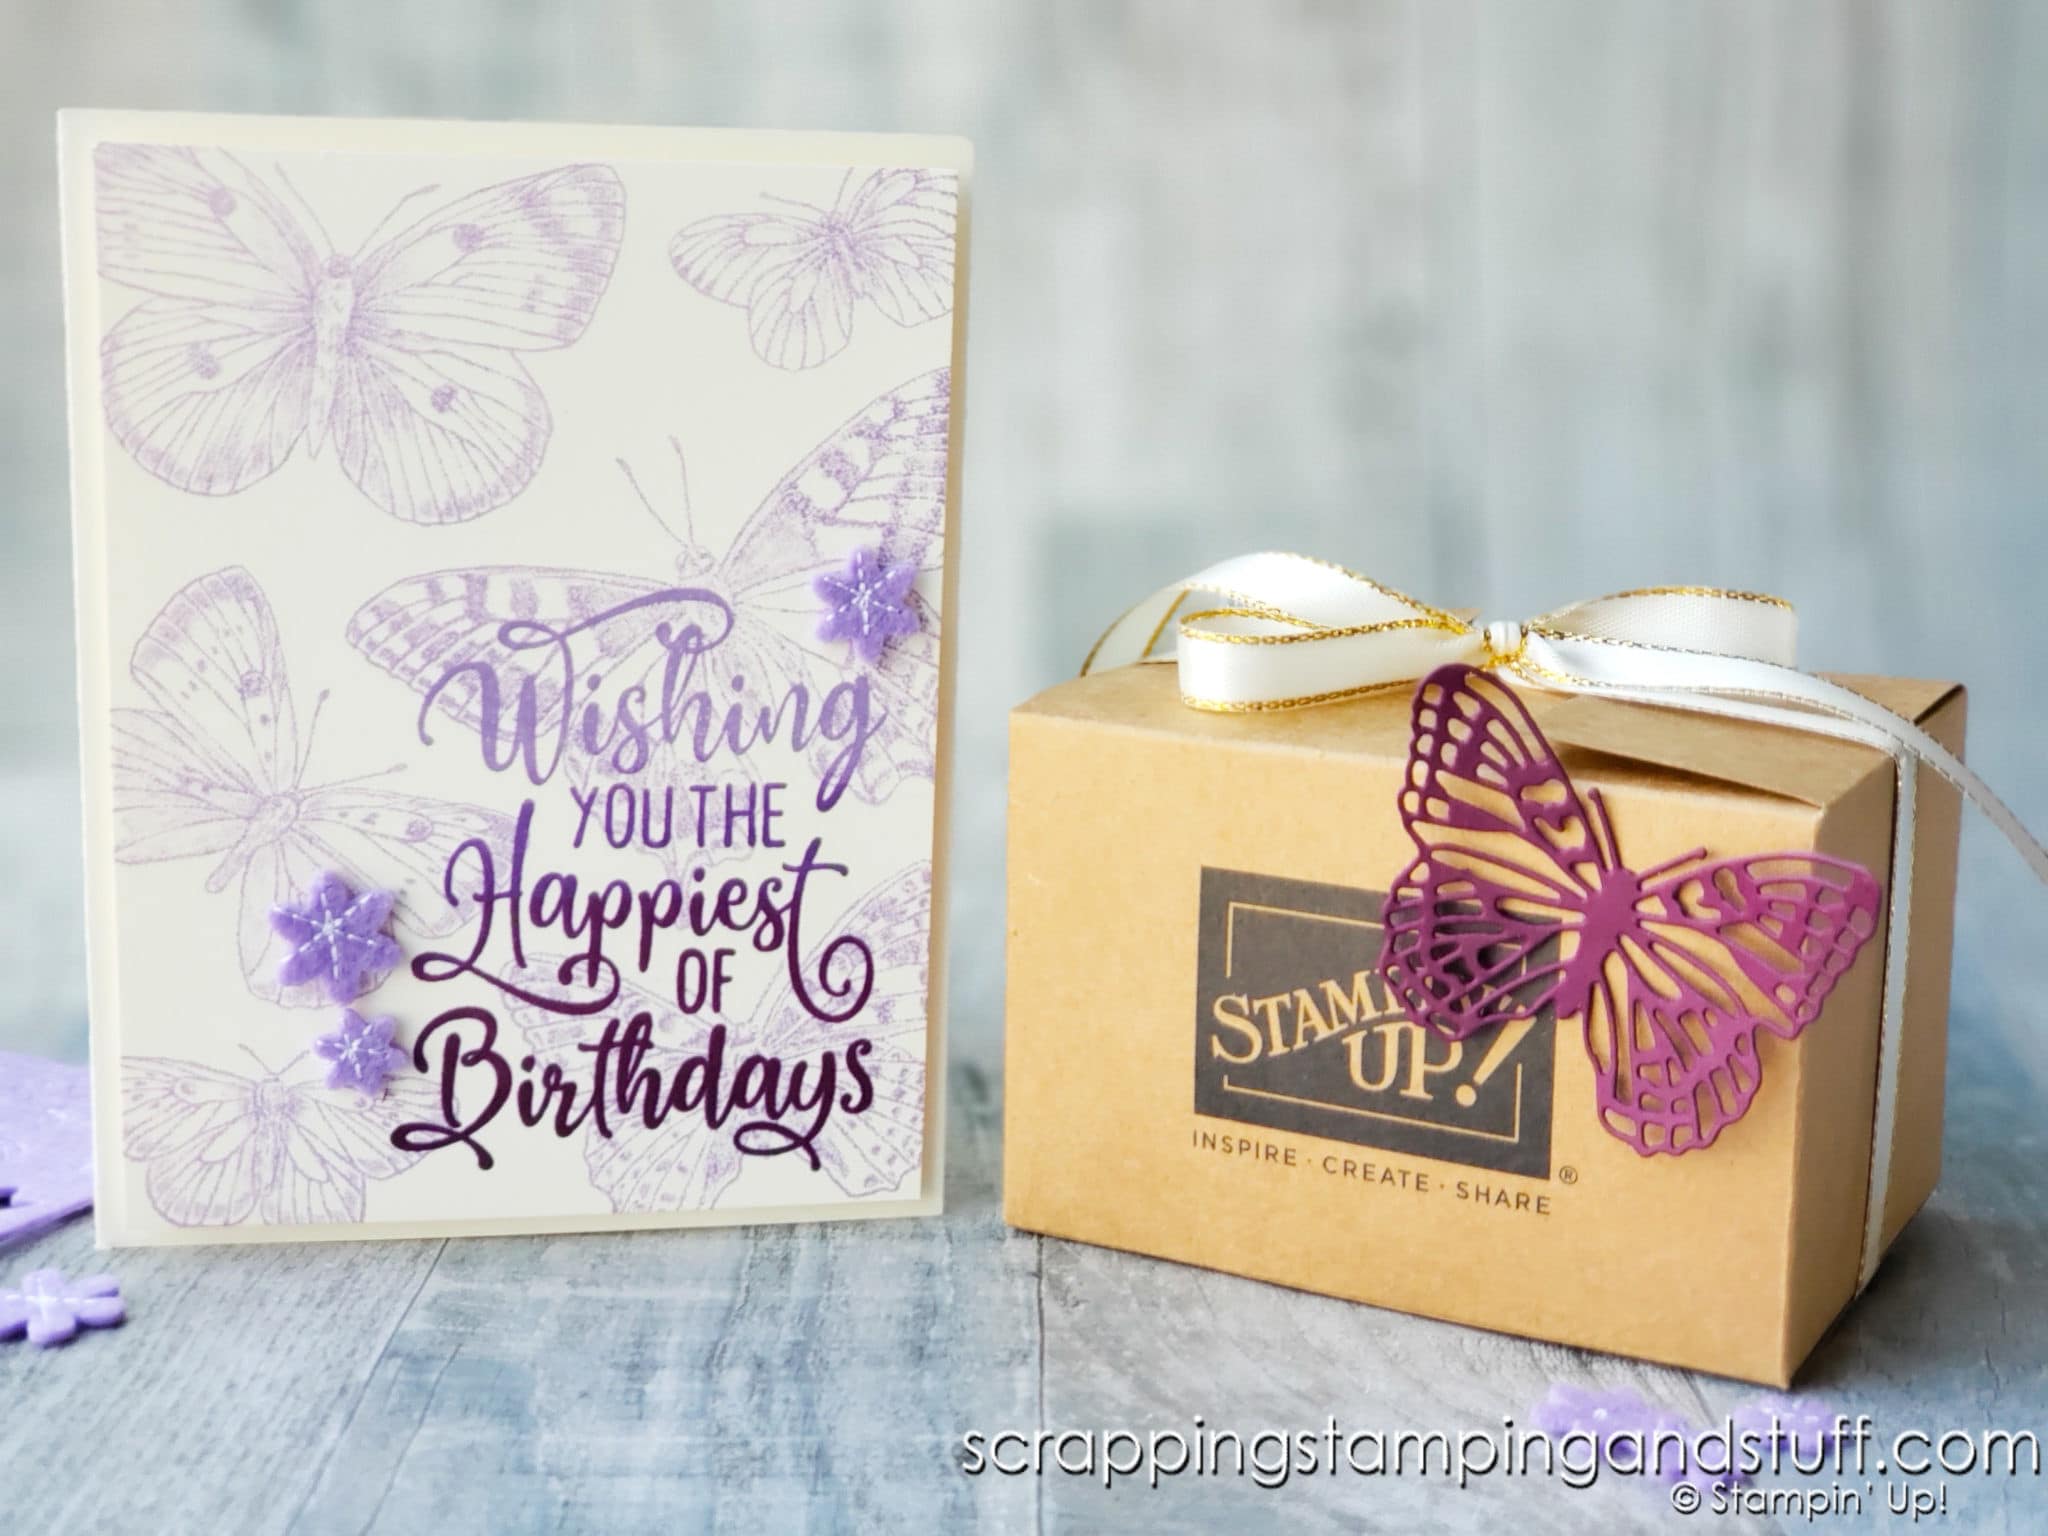 A Butterfly Birthday Card With Techniques, Tips & Tricks – OSAT Blog Hop